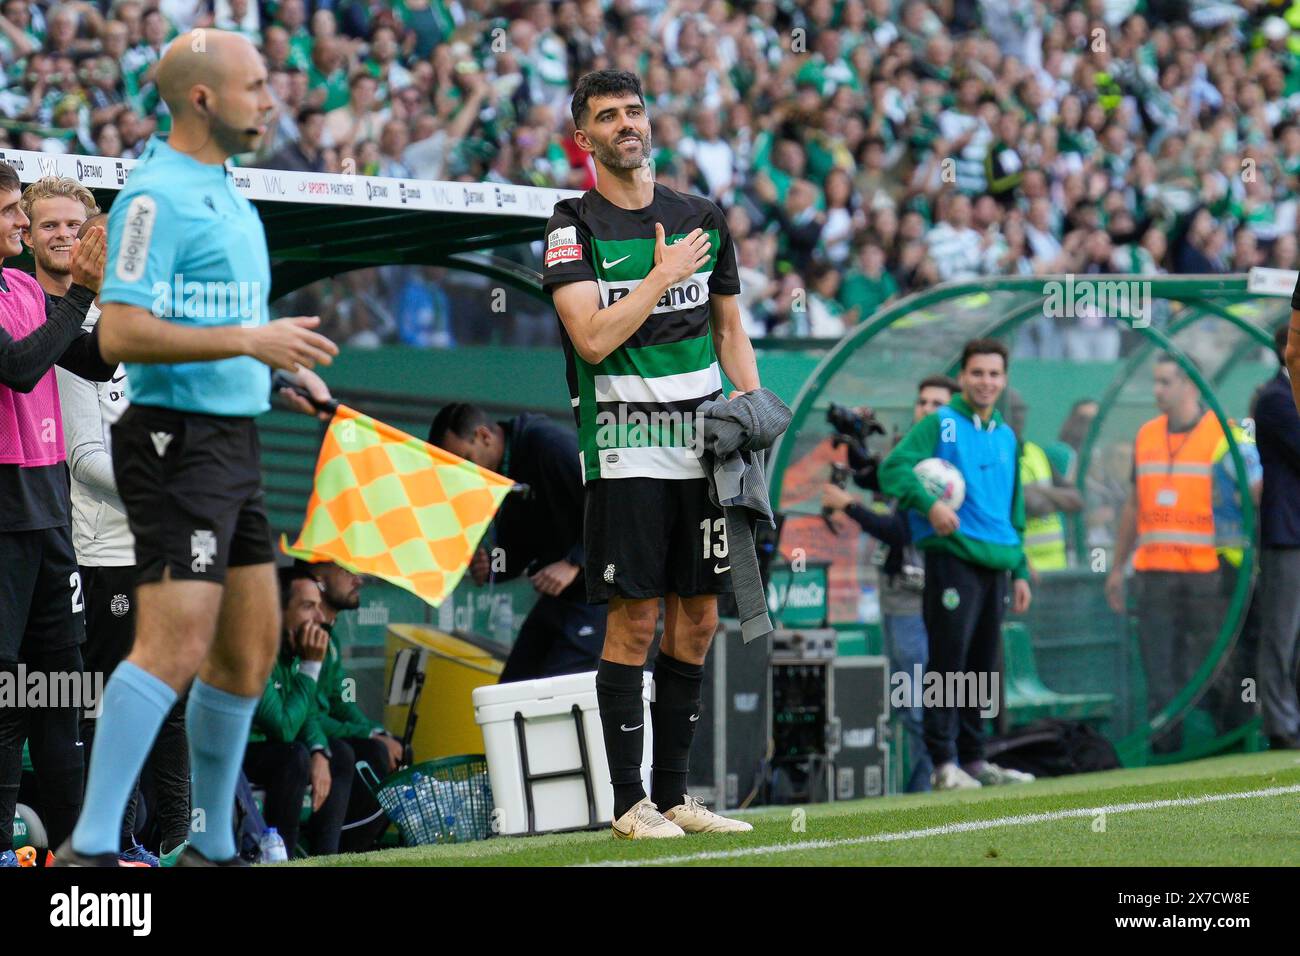 Luis Neto of Sporting CP in action during the Liga Portugal BWIN football match between Sporting CP and GD Chaves at Estadio Jose Alvalade.Final match of Liga Portugal BWIN where Sporting CP received the trophy of Portugues League Champions. Final score: Sporting CP 3:0 GD Chaves. Stock Photo